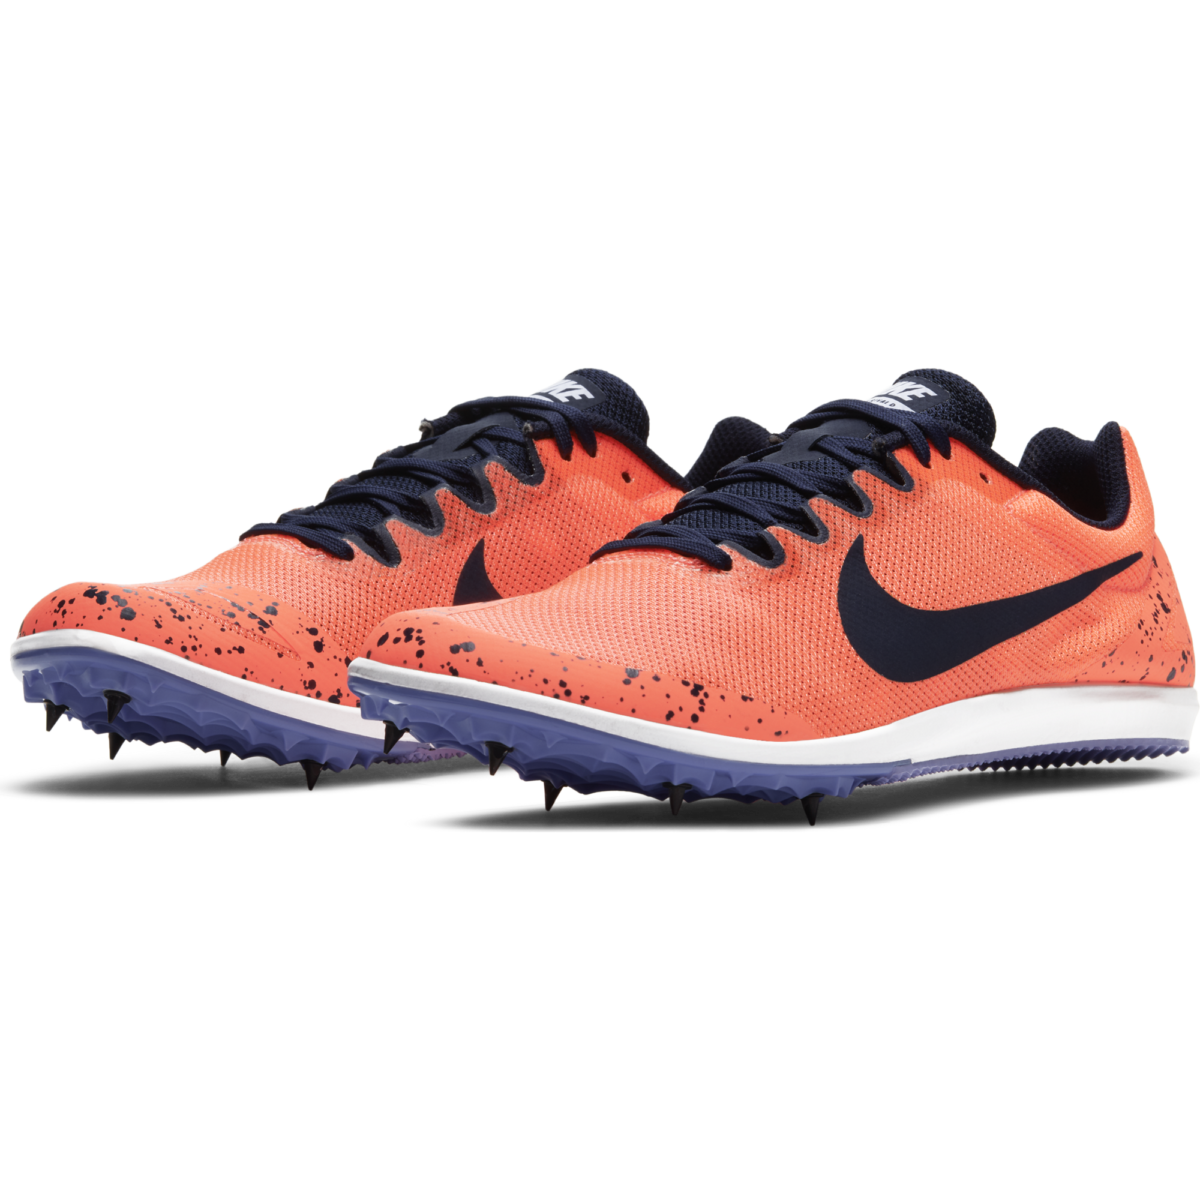 Unisex Nike Zoom Rival D 10 Distance Spikes 907566-800